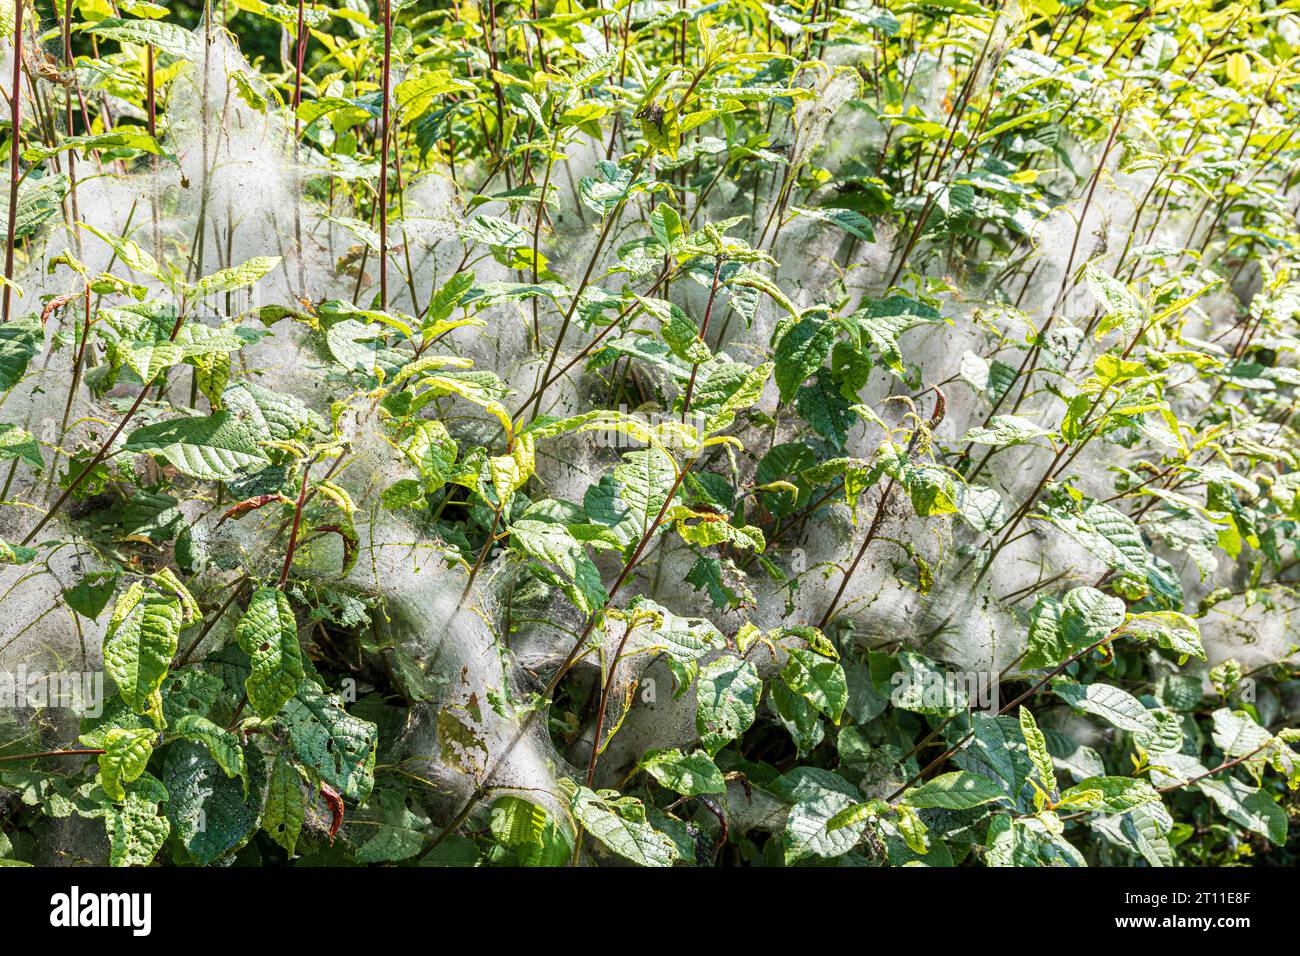 A hedge with silk spider-like webs (perhaps created by caterpillars hatched from Ermine moths Yponomeutidae) in early June in Cumbria, England UK. Stock Photo